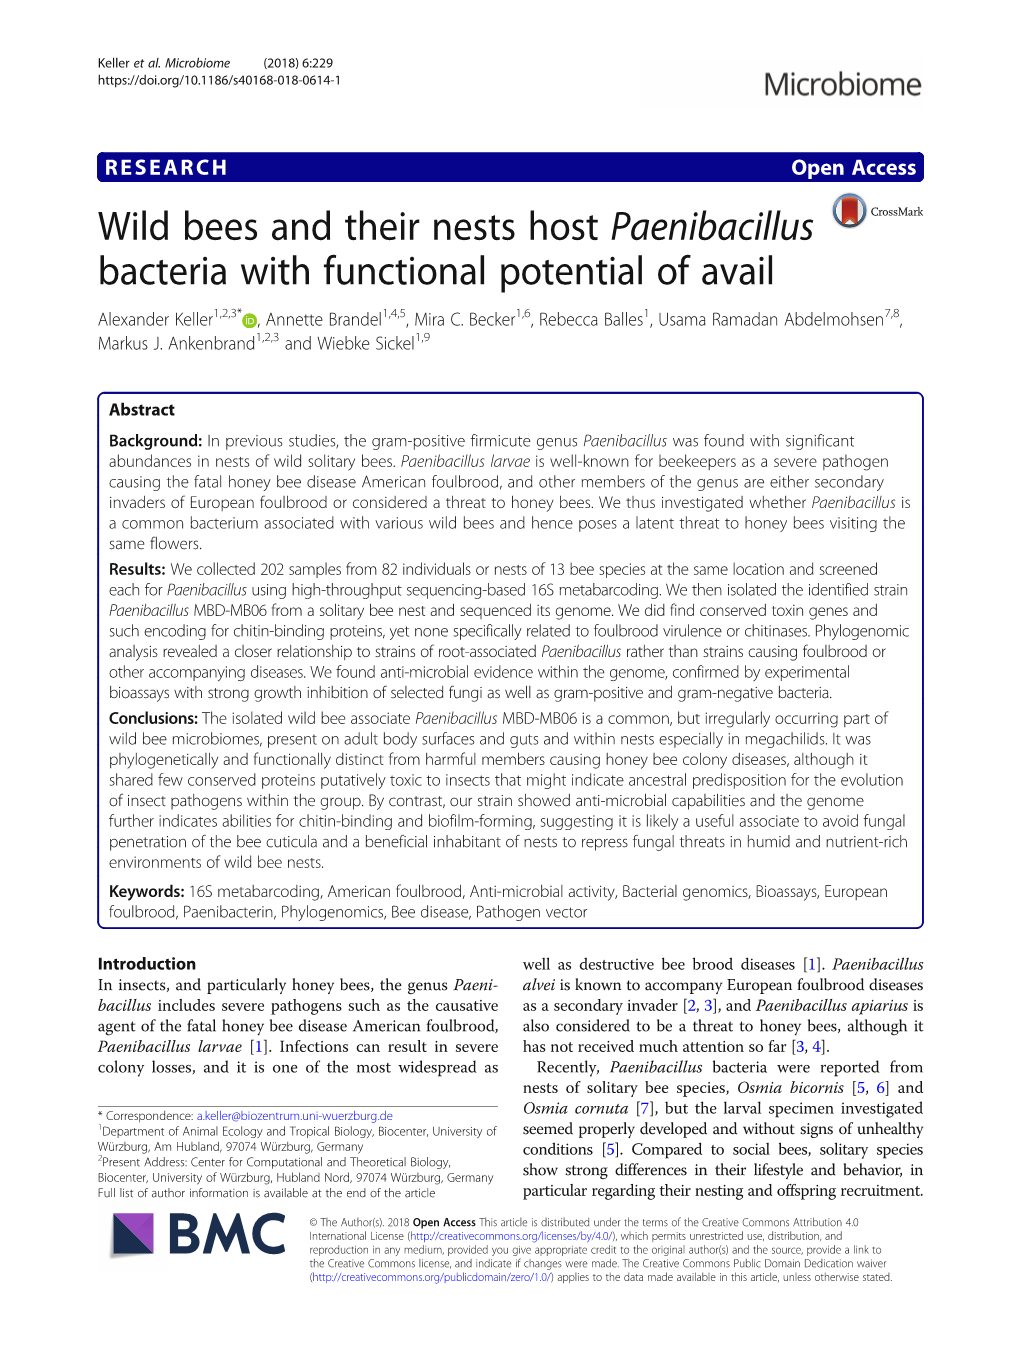 Wild Bees and Their Nests Host Paenibacillus Bacteria with Functional Potential of Avail Alexander Keller1,2,3* , Annette Brandel1,4,5, Mira C